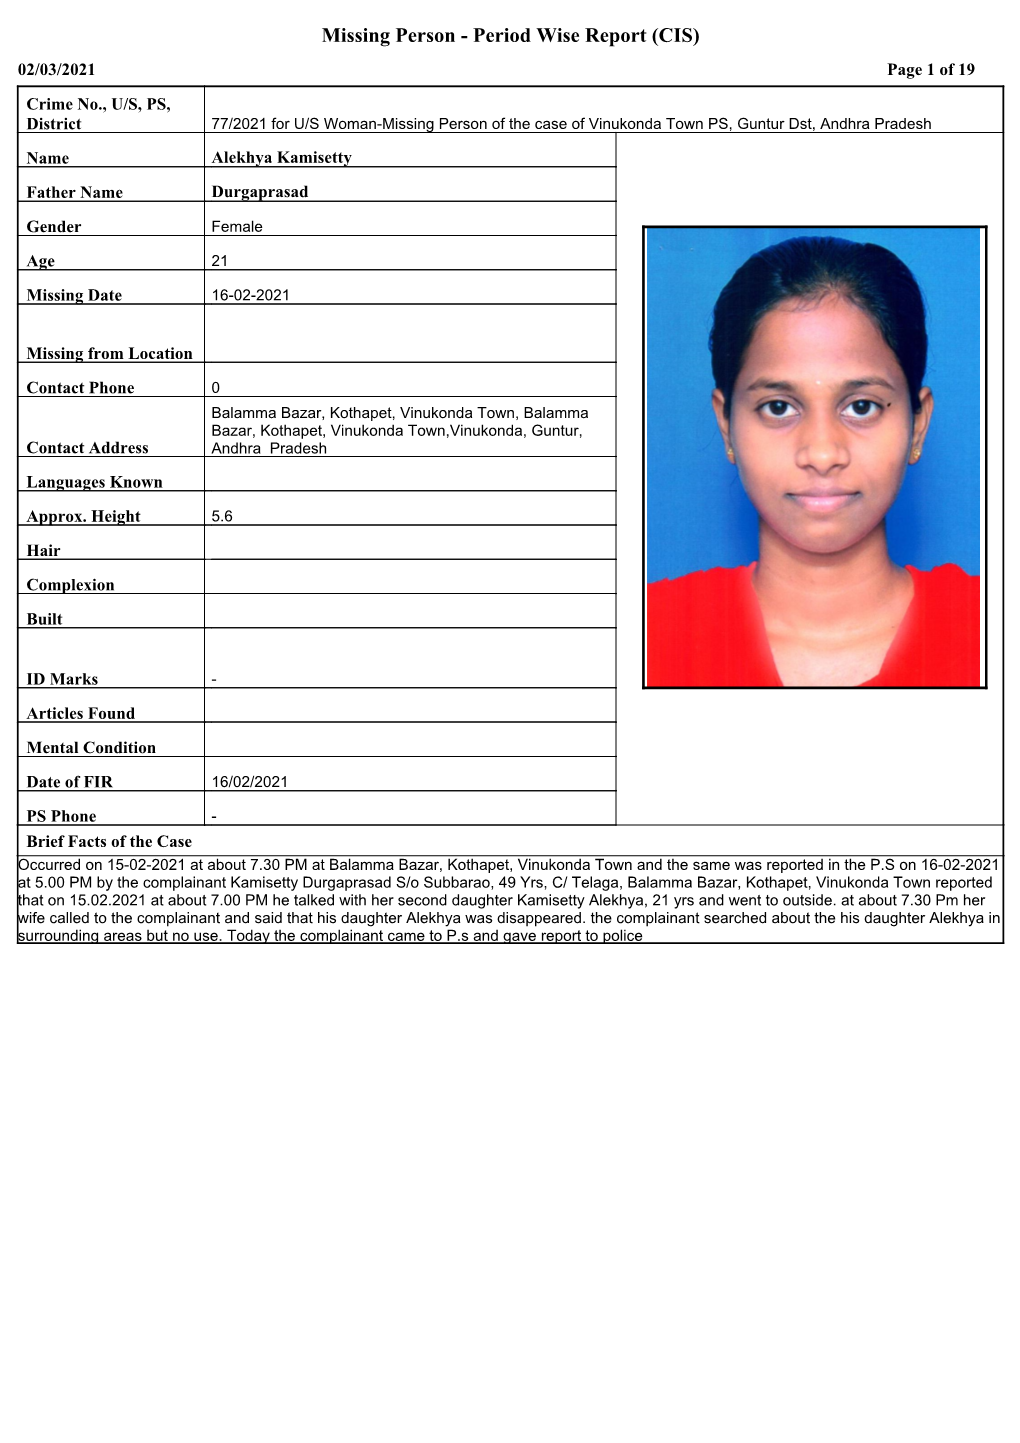 Missing Person - Period Wise Report (CIS) 02/03/2021 Page 1 of 19